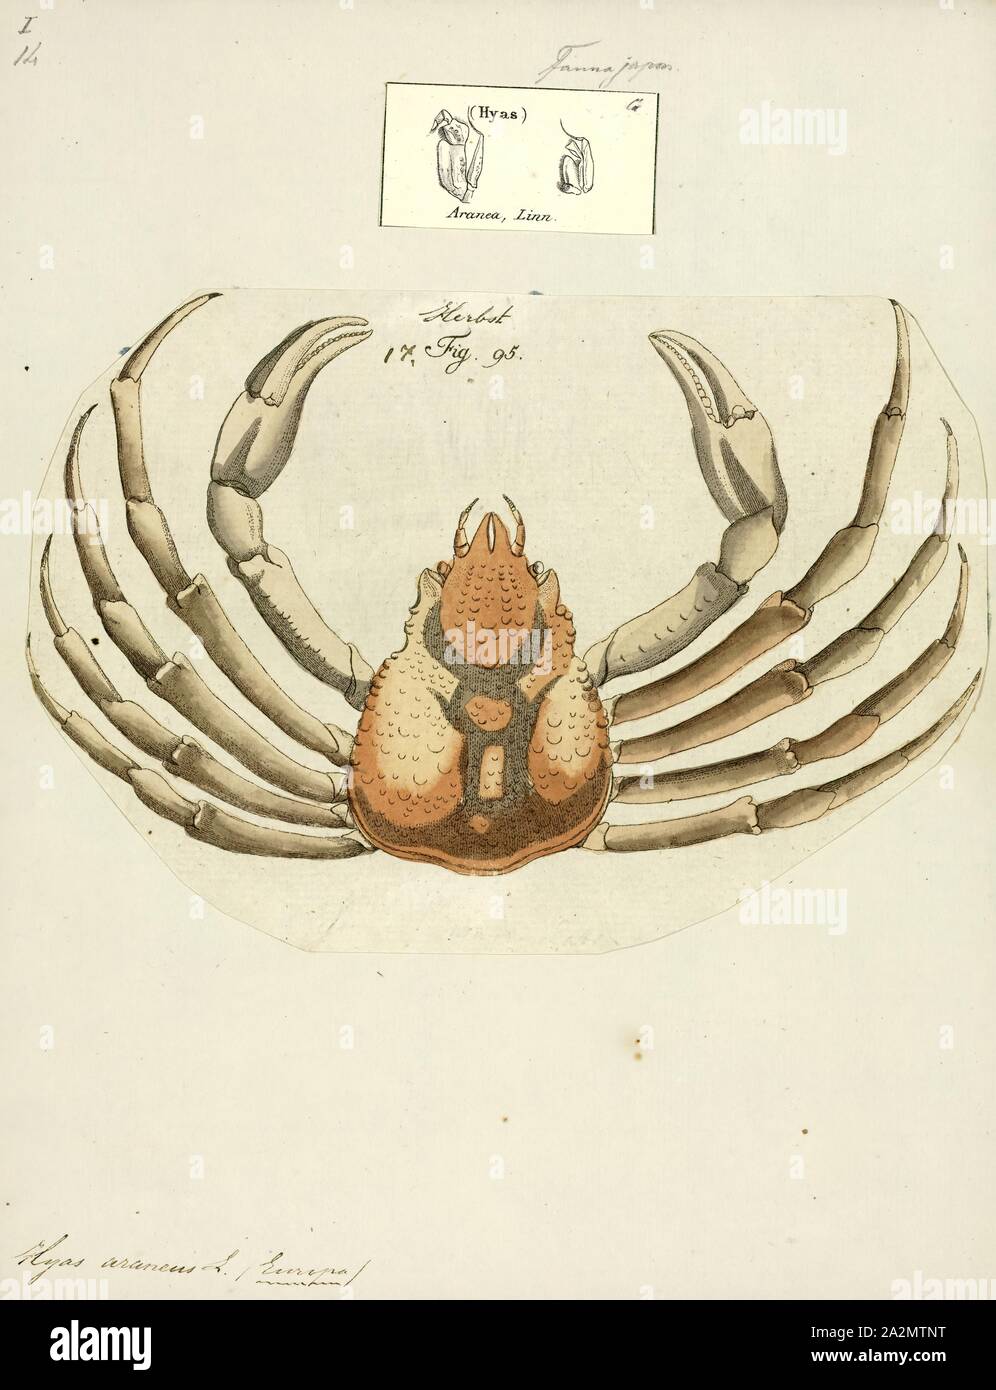 Hyas araneus, Print, The great spider crab, Hyas araneus, is a species of crab found in northeast Atlantic waters and the North Sea, usually below the tidal zone Stock Photo